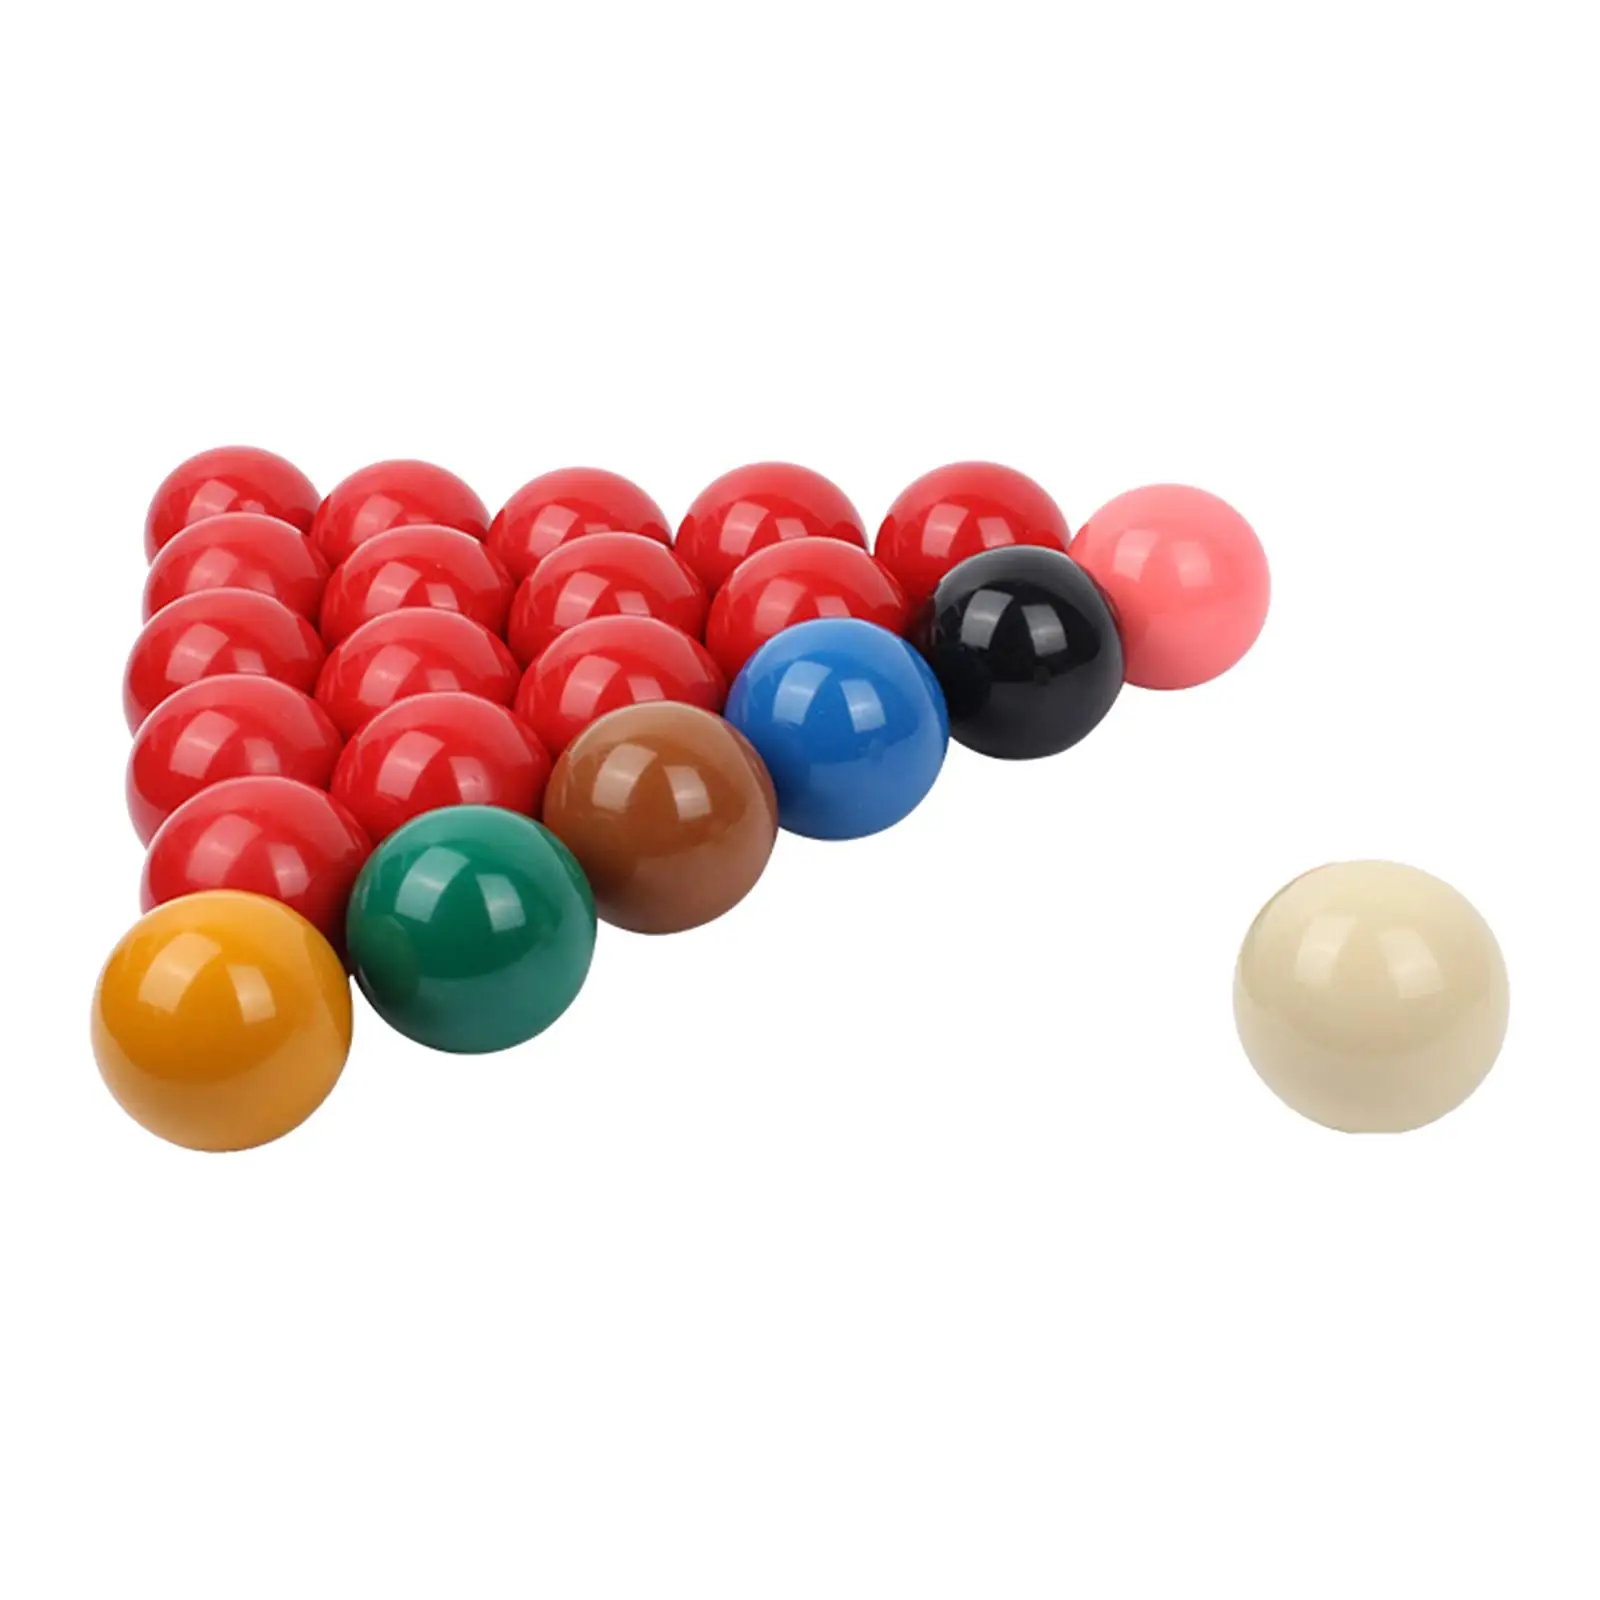 22Pieces Snooker Ball Set, Pool Table Balls, Resin Colorful Billiard Balls for Leisure Sports Snooker & Billiard Accessories